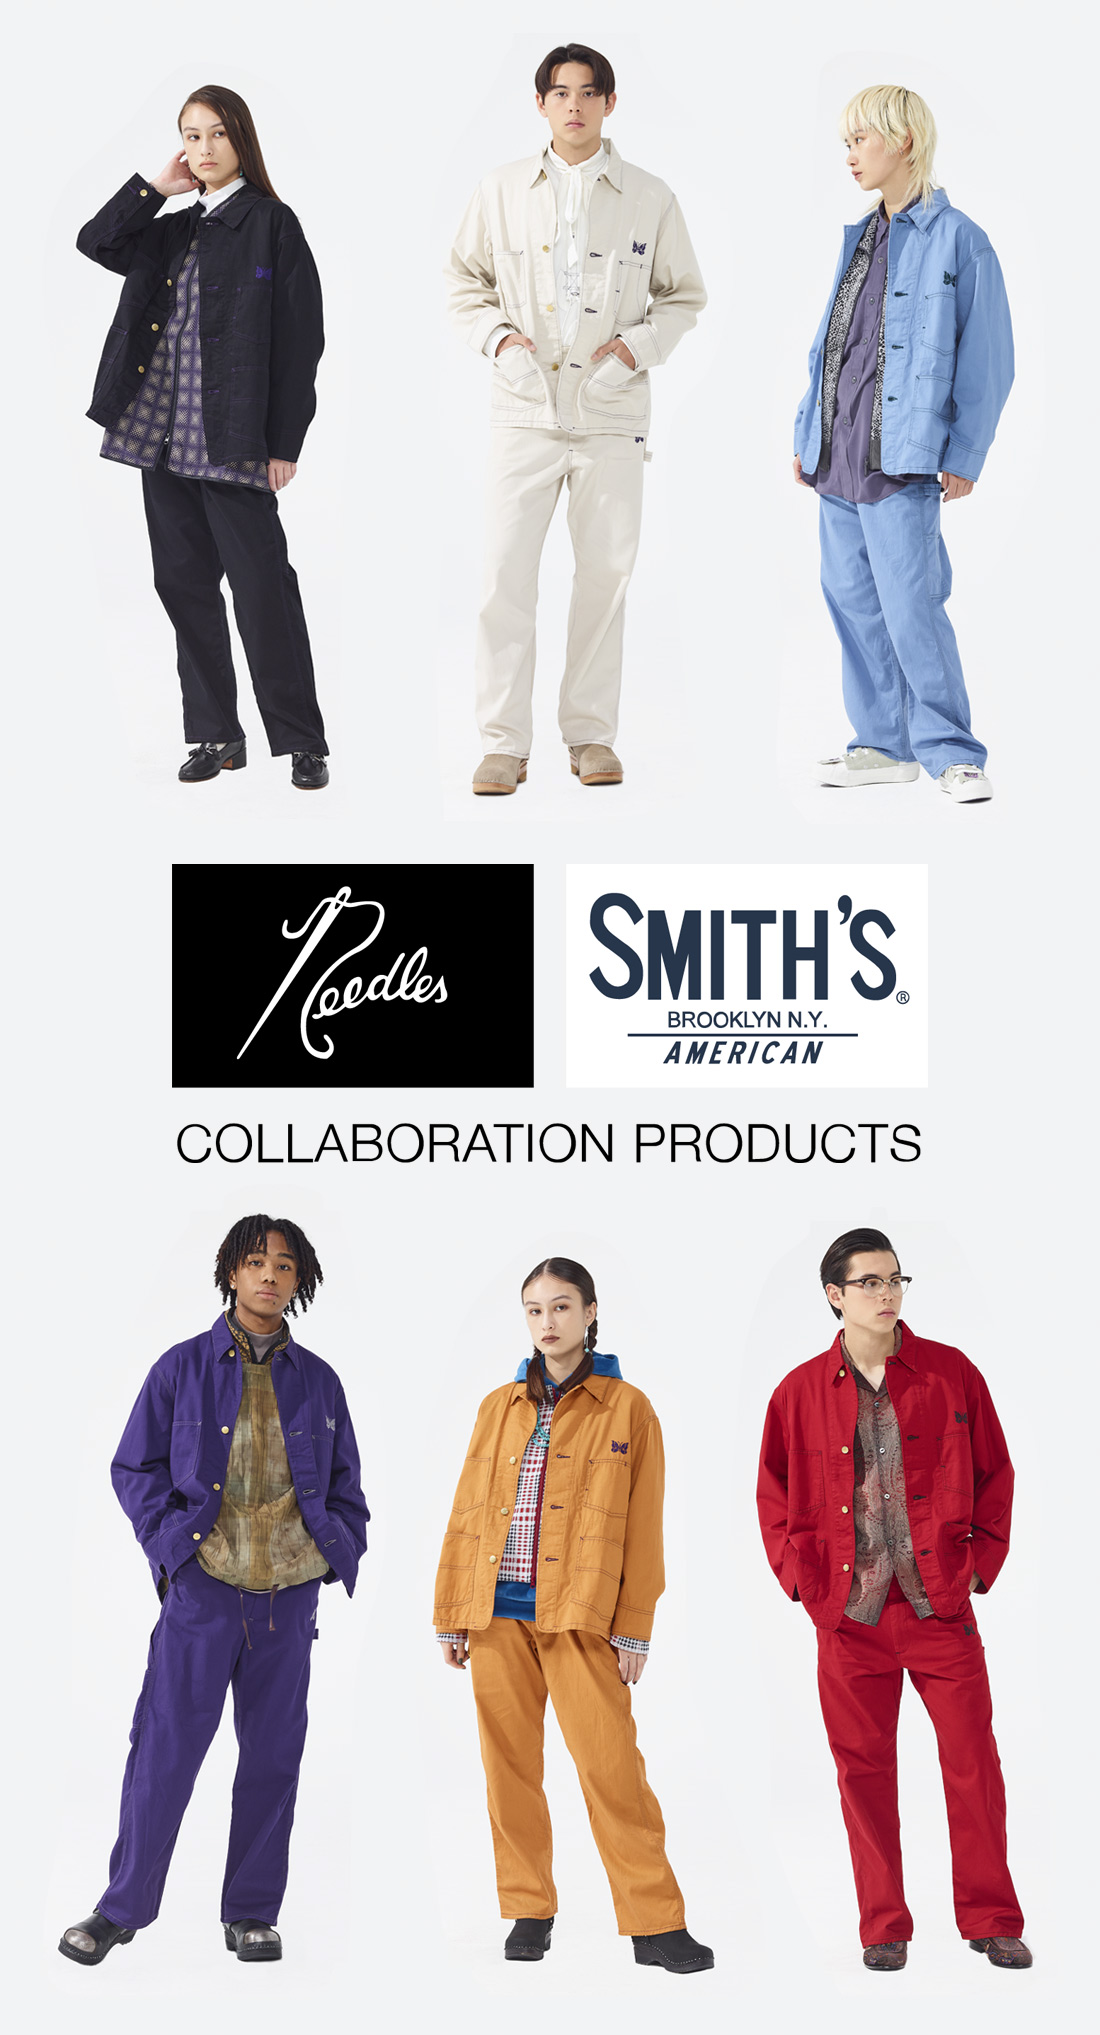 〈NEEDLES〉x〈SMITH'S〉COLLABORATION PRODUCTS